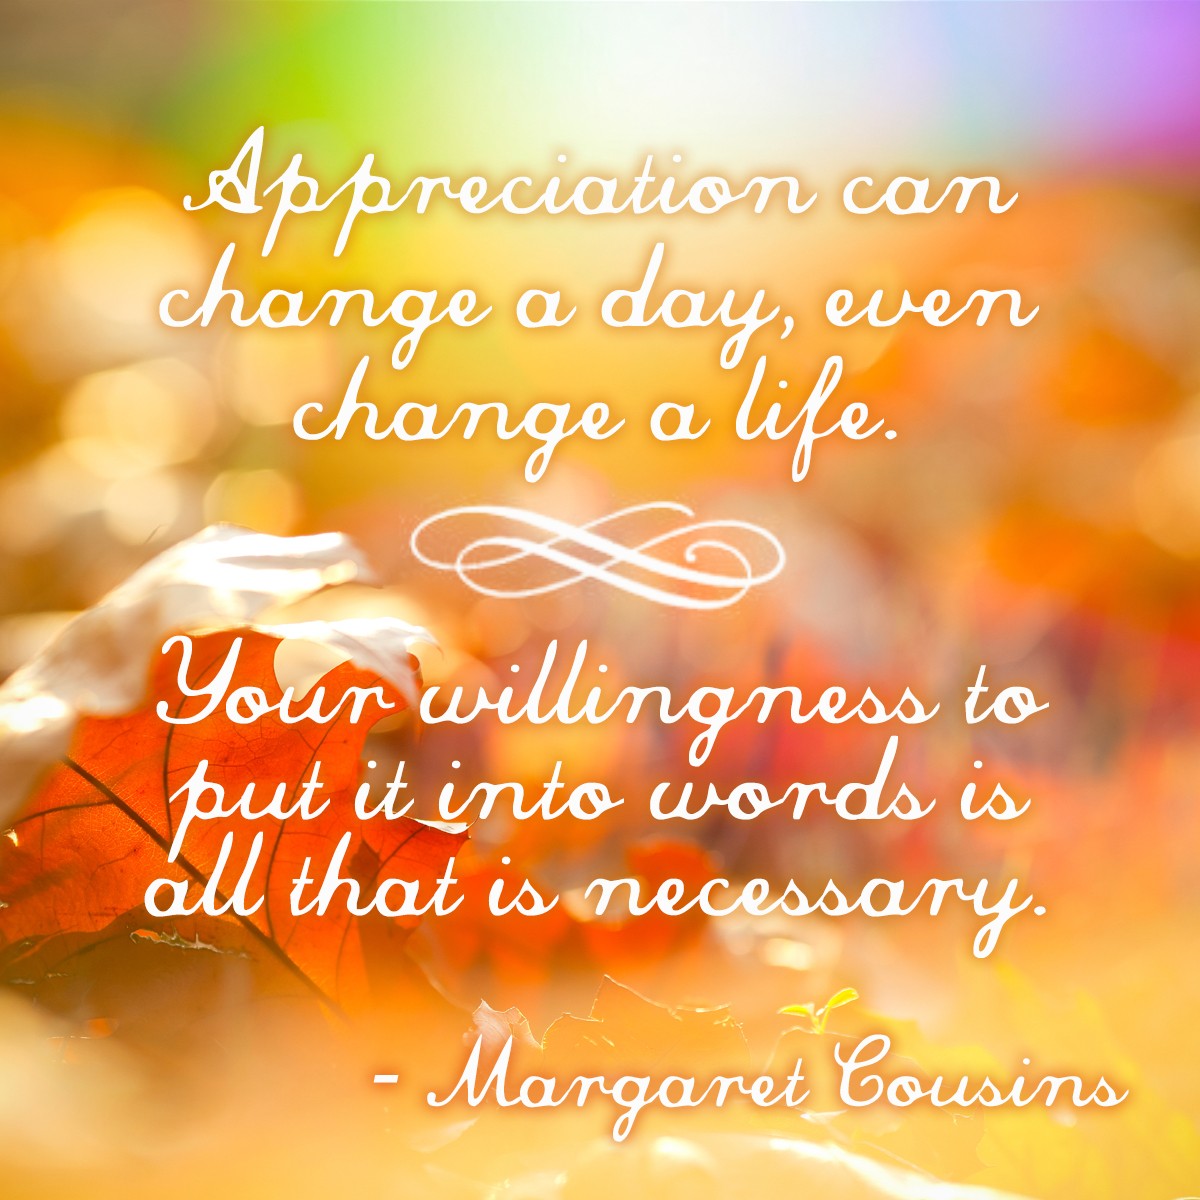 Appreciation can change a day, even change a life. Your willingness to put it into words is all that is necessary. - Margaret Cousins | MakeItGrateful.com